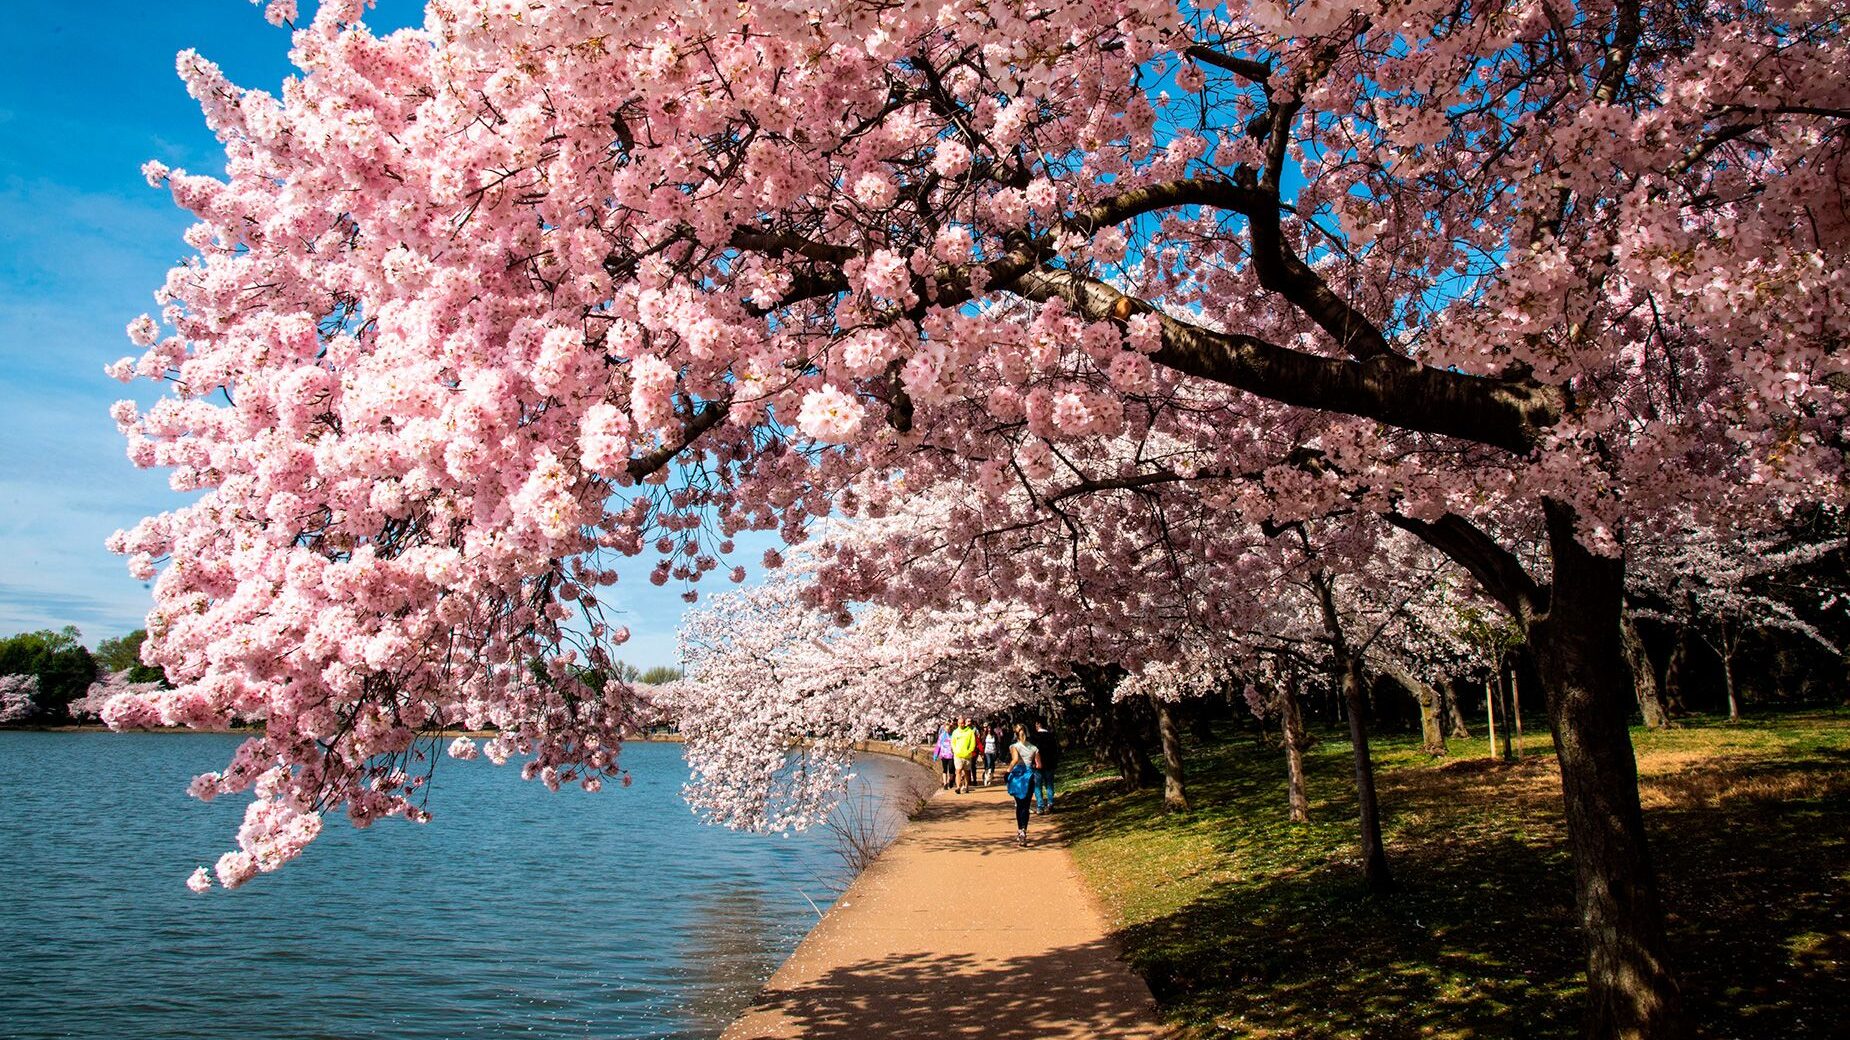 Hitting peak time for the cherry tree bloom in Washington, D.C., can be a little tricky. But if you...